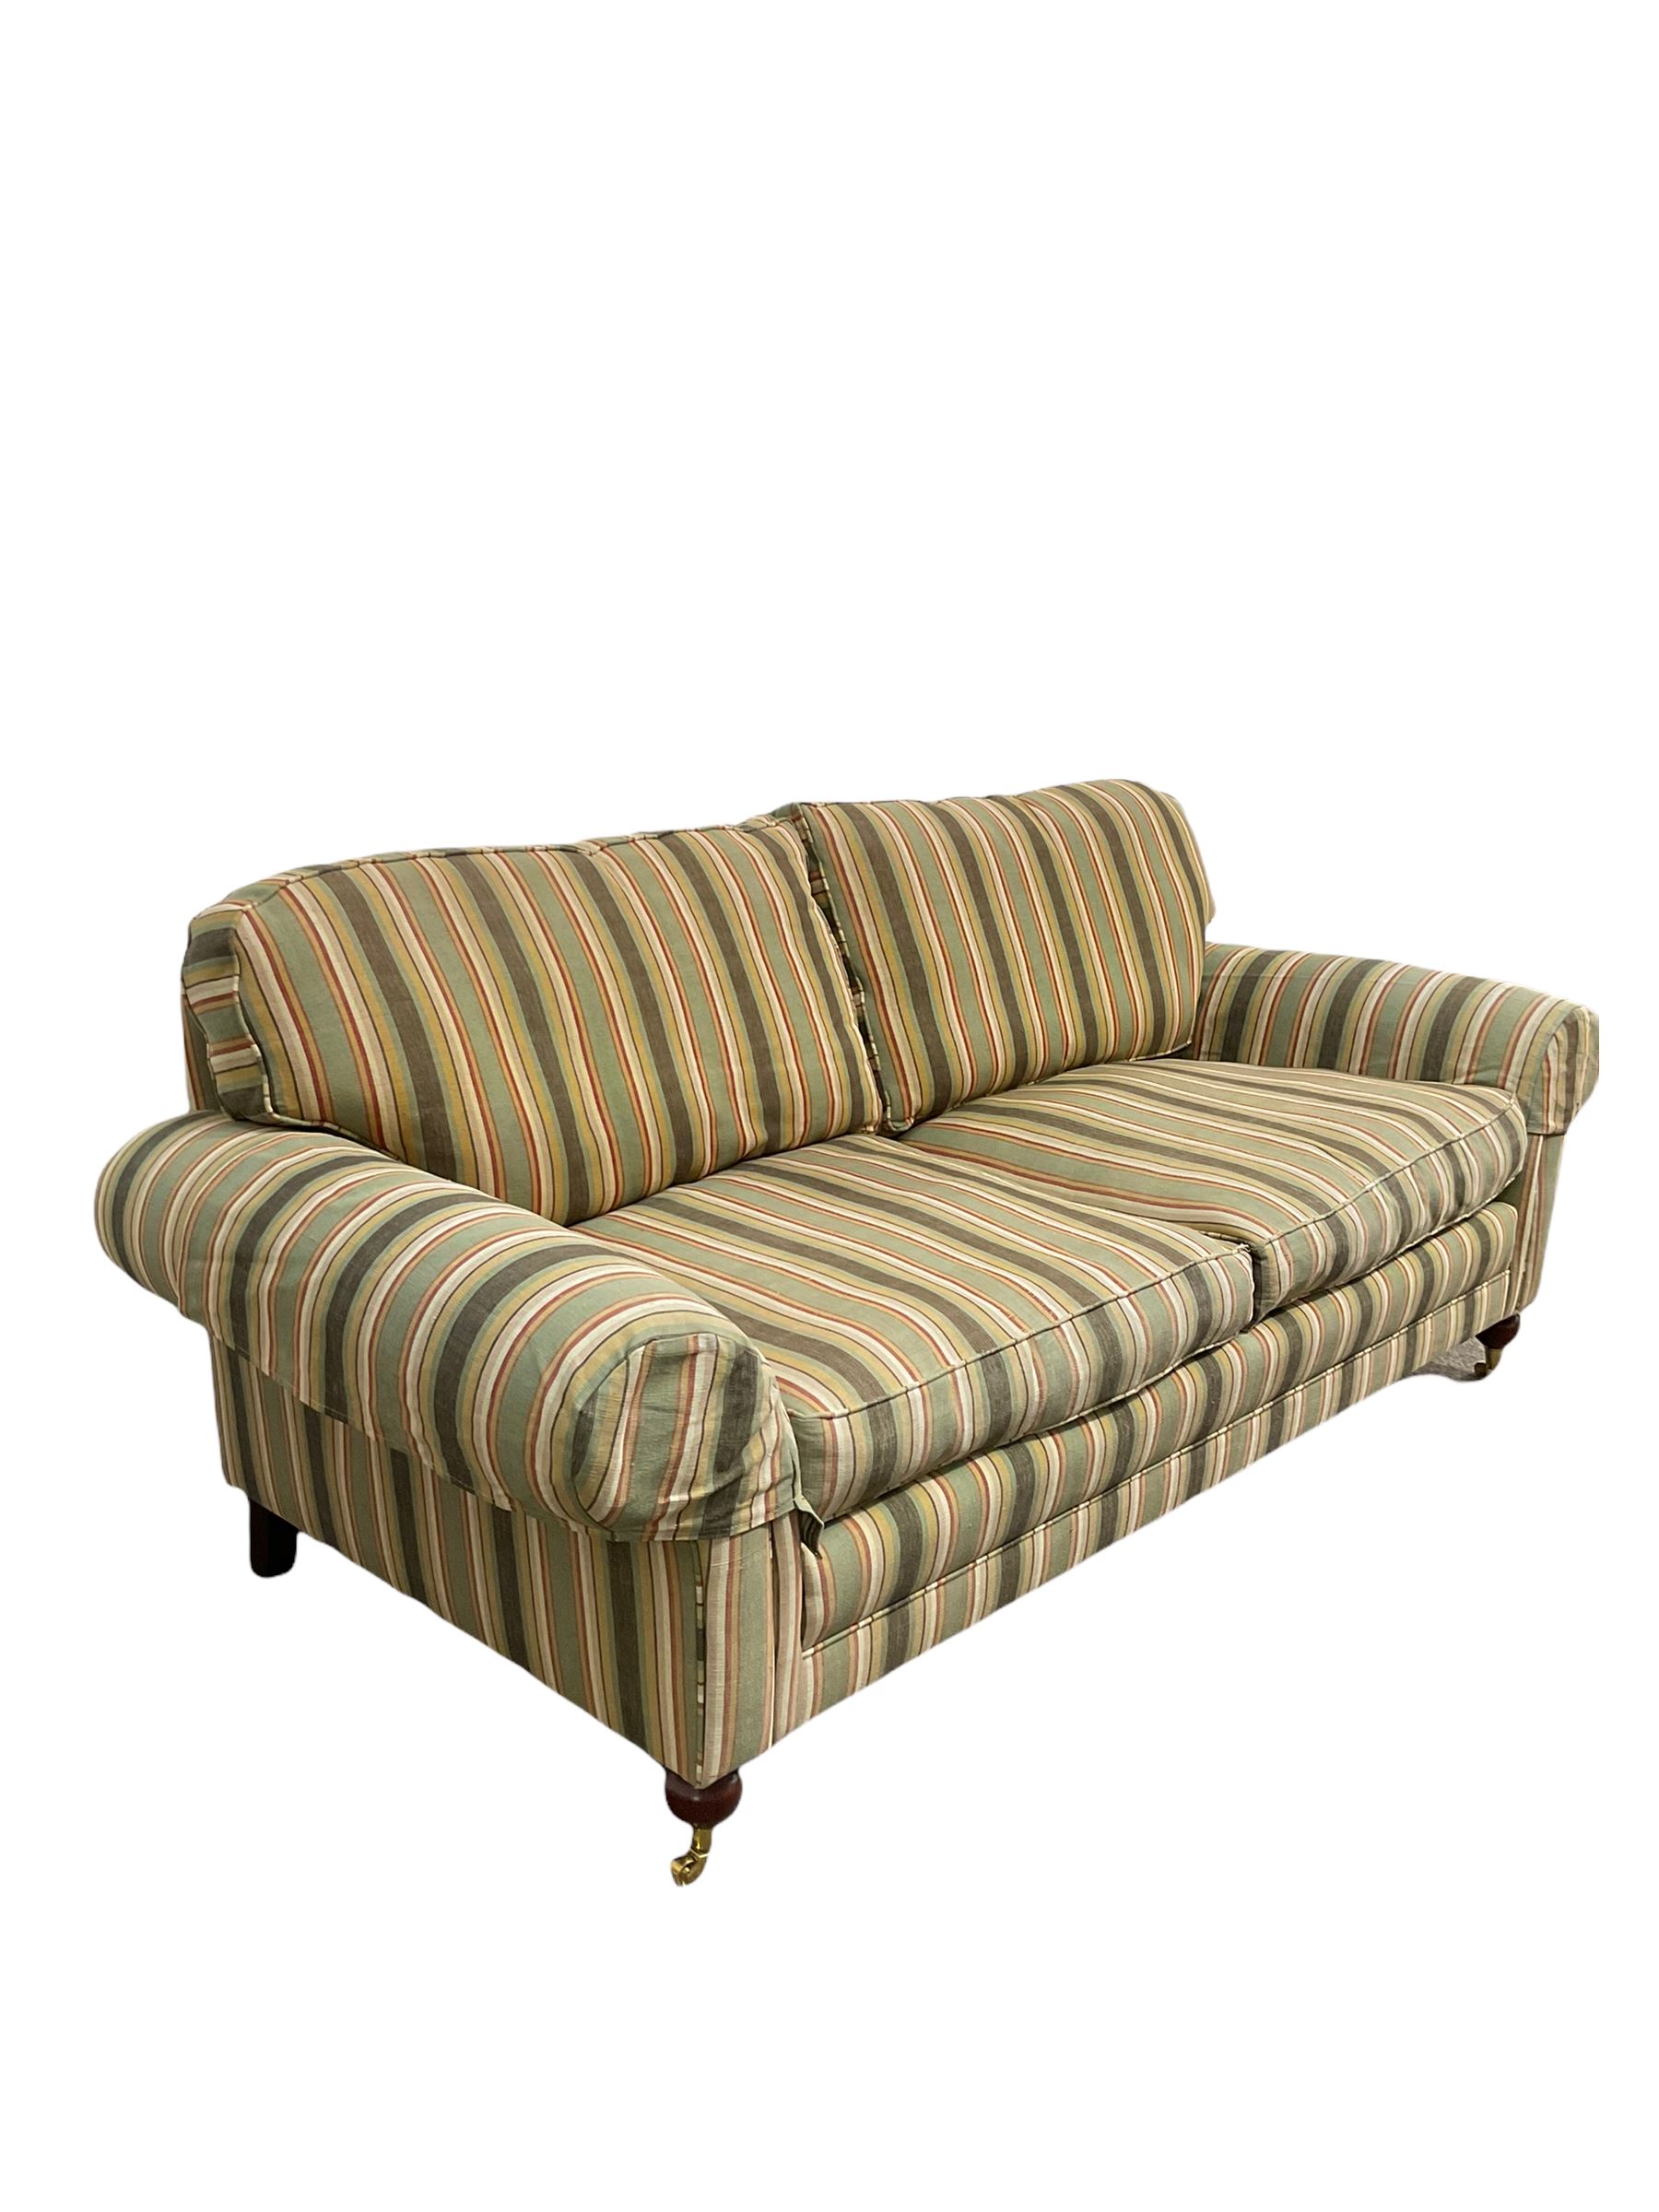 Traditional three seater sofa - Image 2 of 3